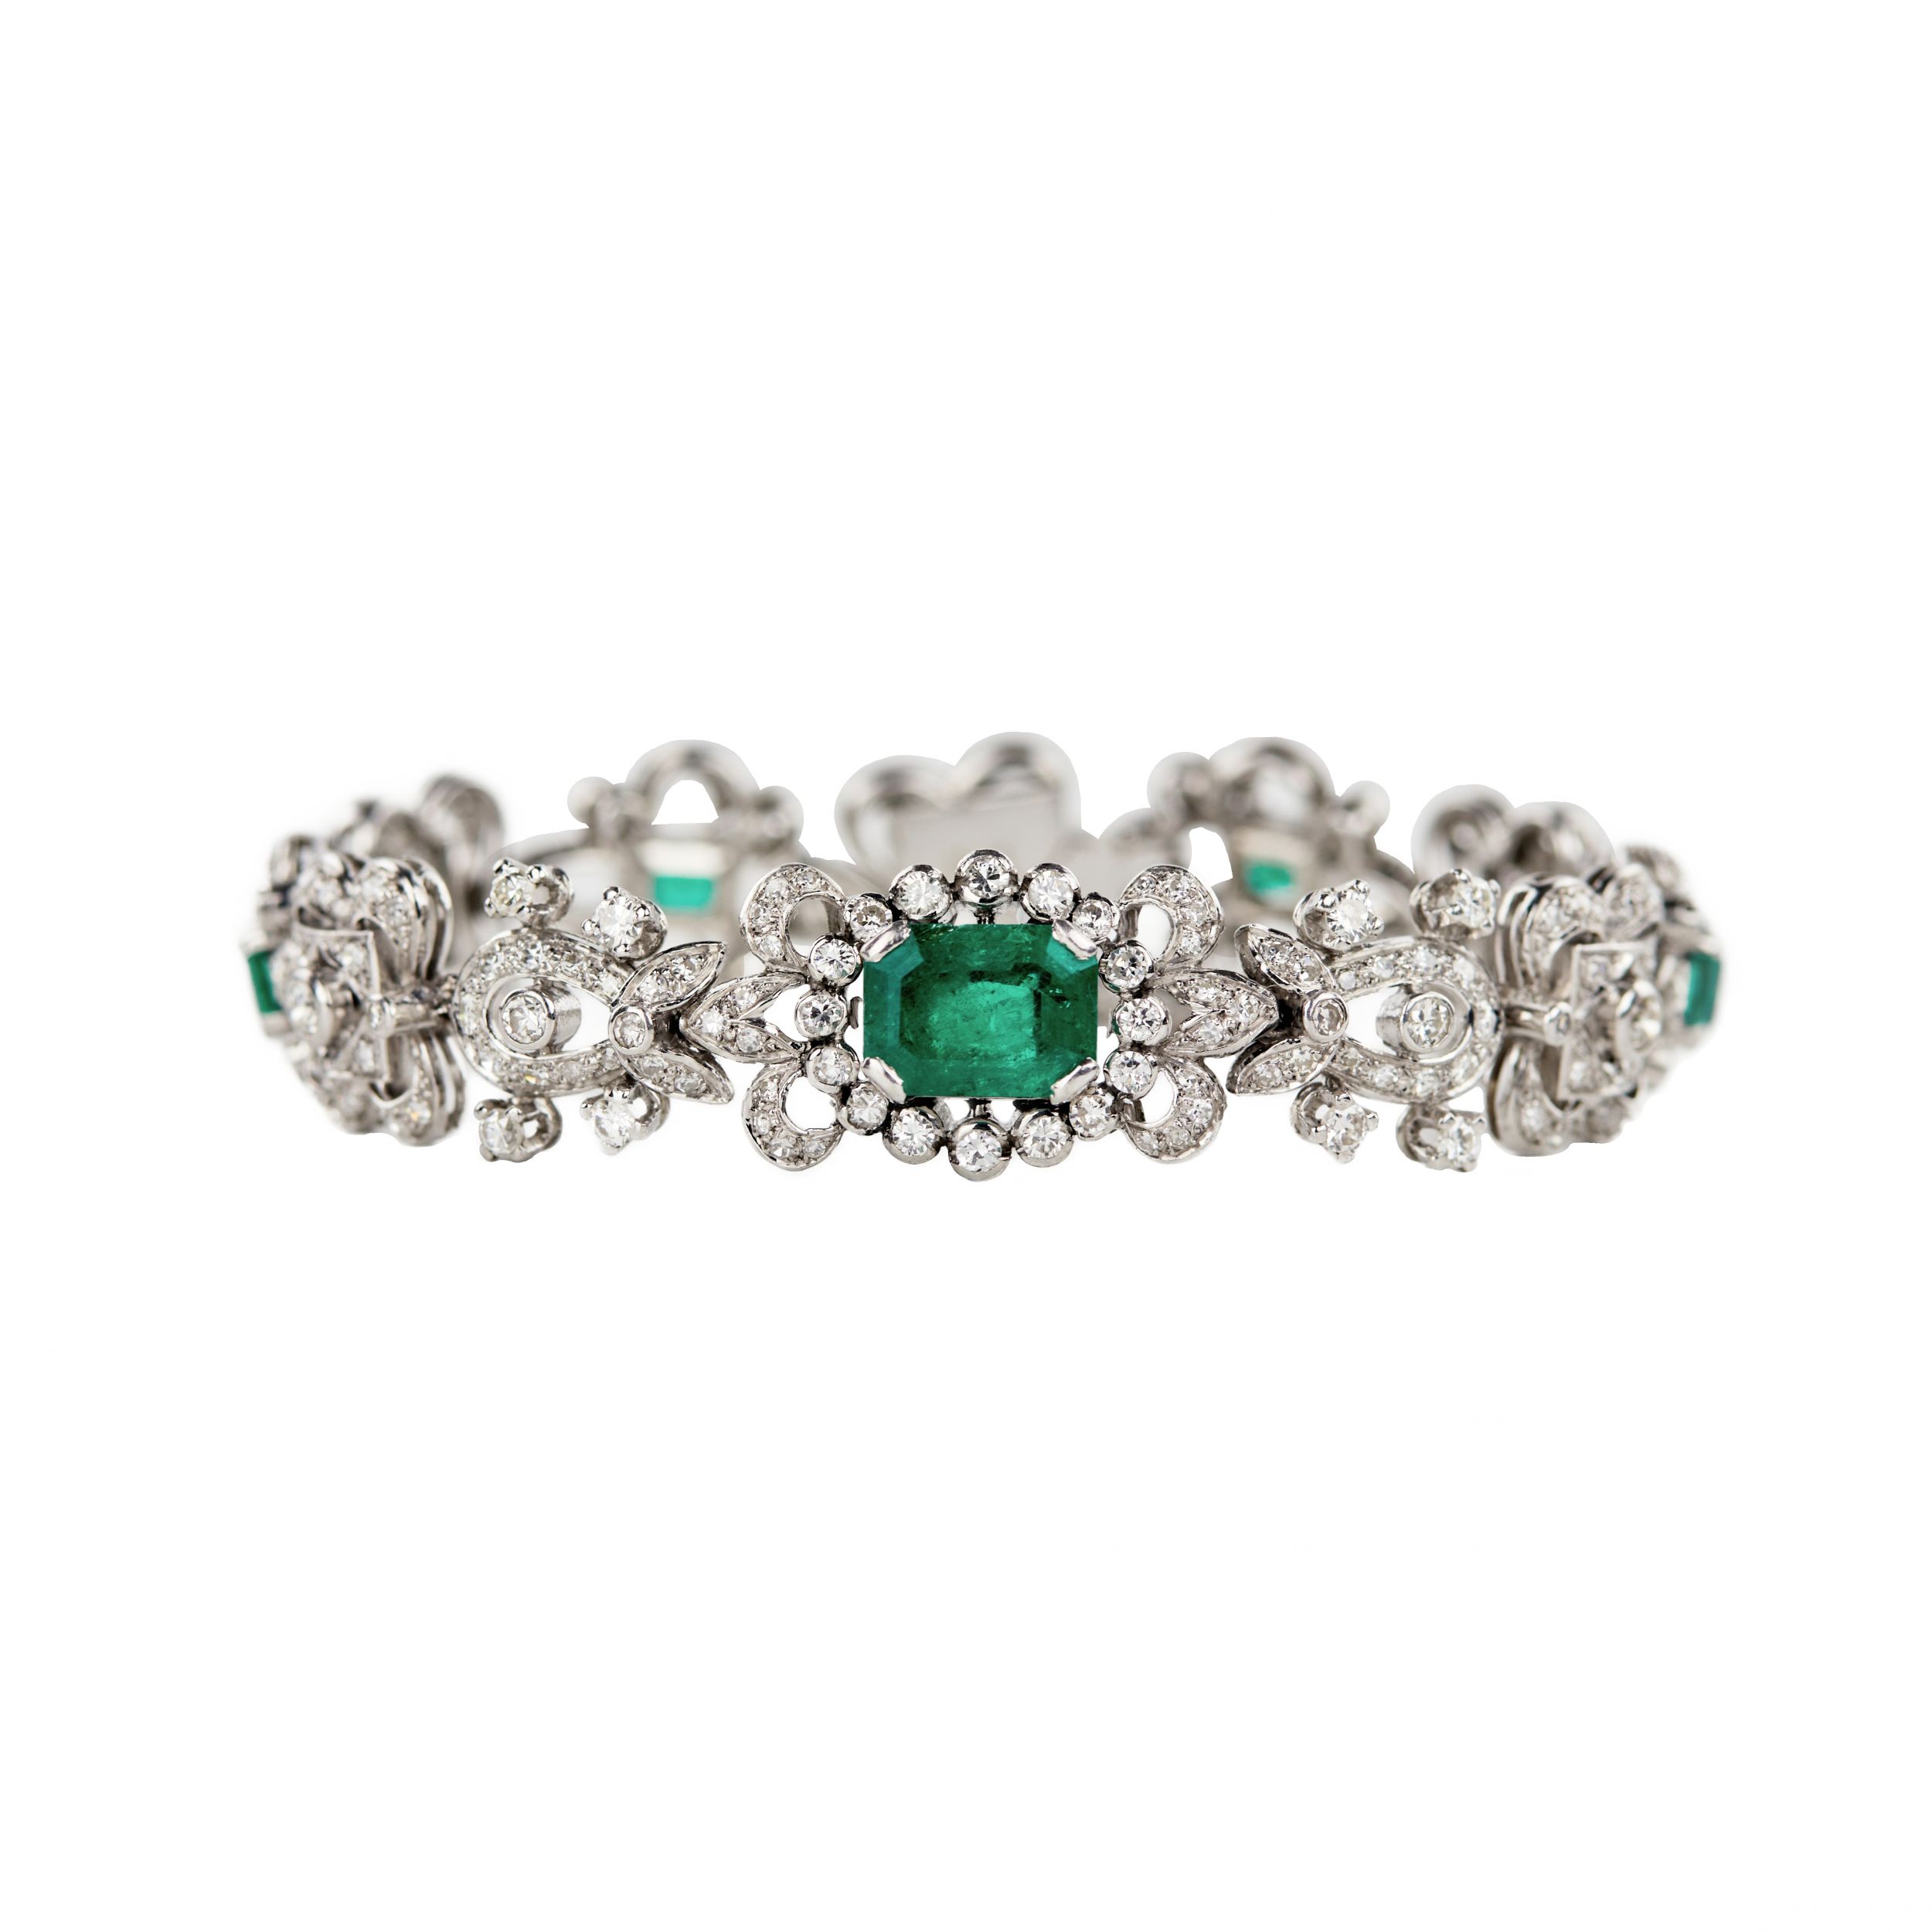 Ladies bracelet in platinum with emeralds and diamonds. First quarter of the 20th century. - Image 2 of 6